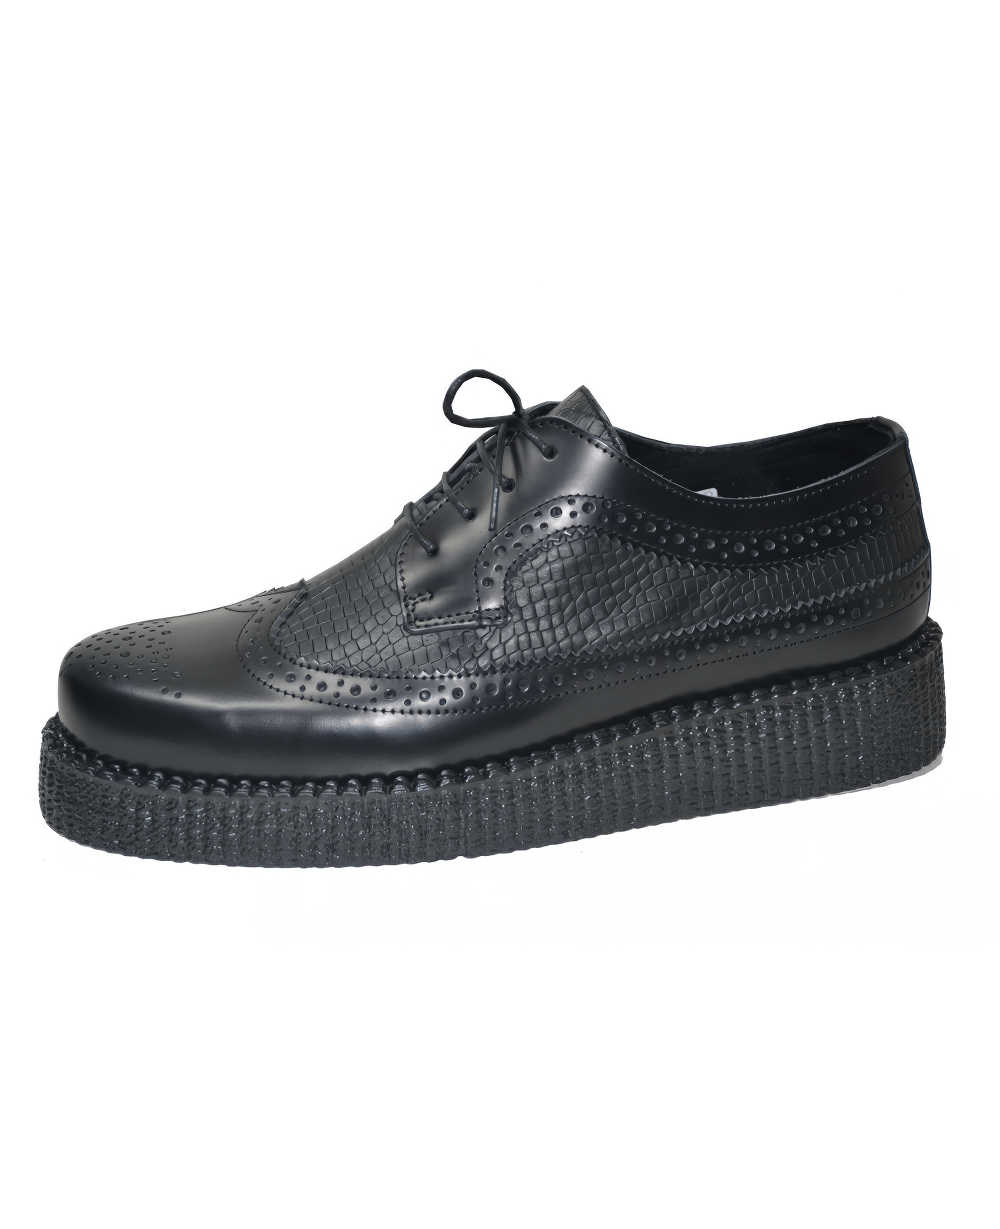 Unisex Black Lace-Up Leather Derby Shoes with Rubber Sole